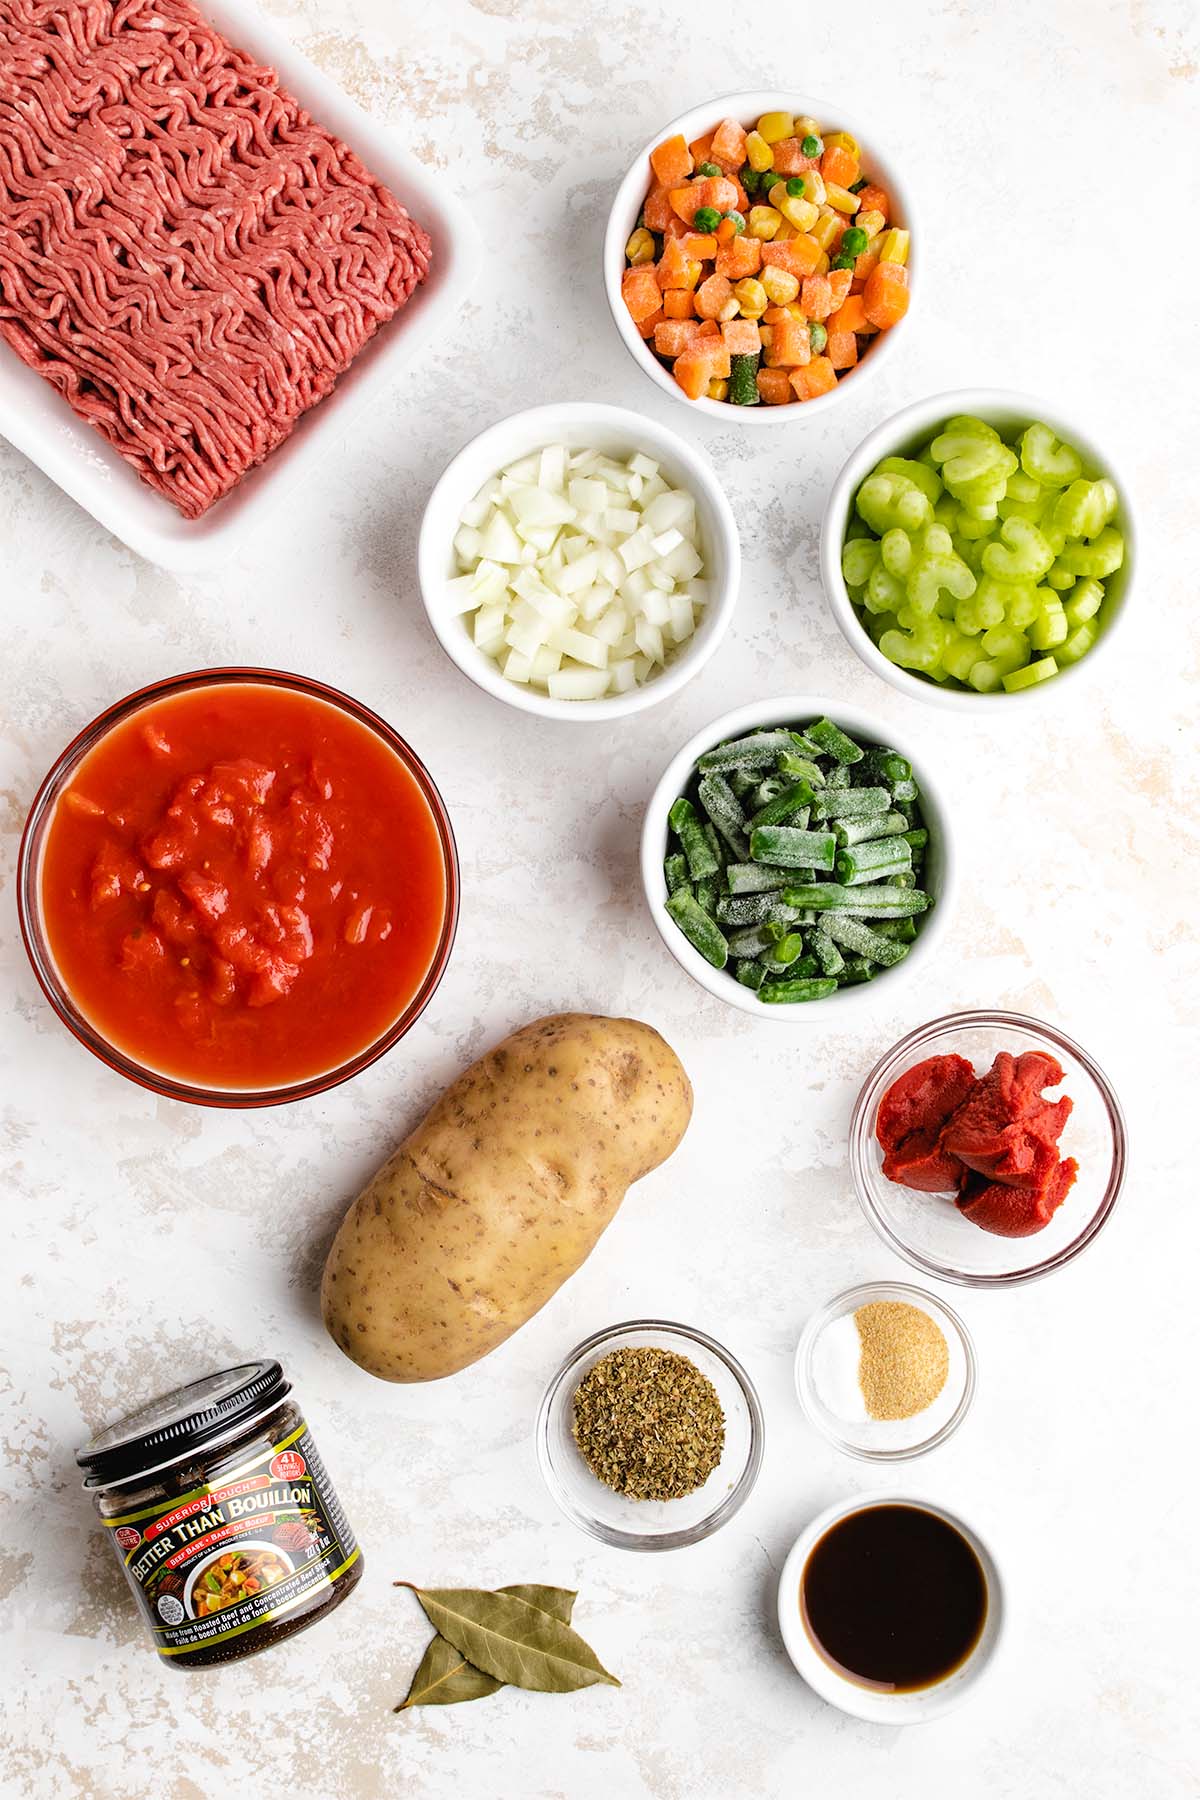 Ingredients needed to make Instant Pot Hamburger Soup viewed from overhead.